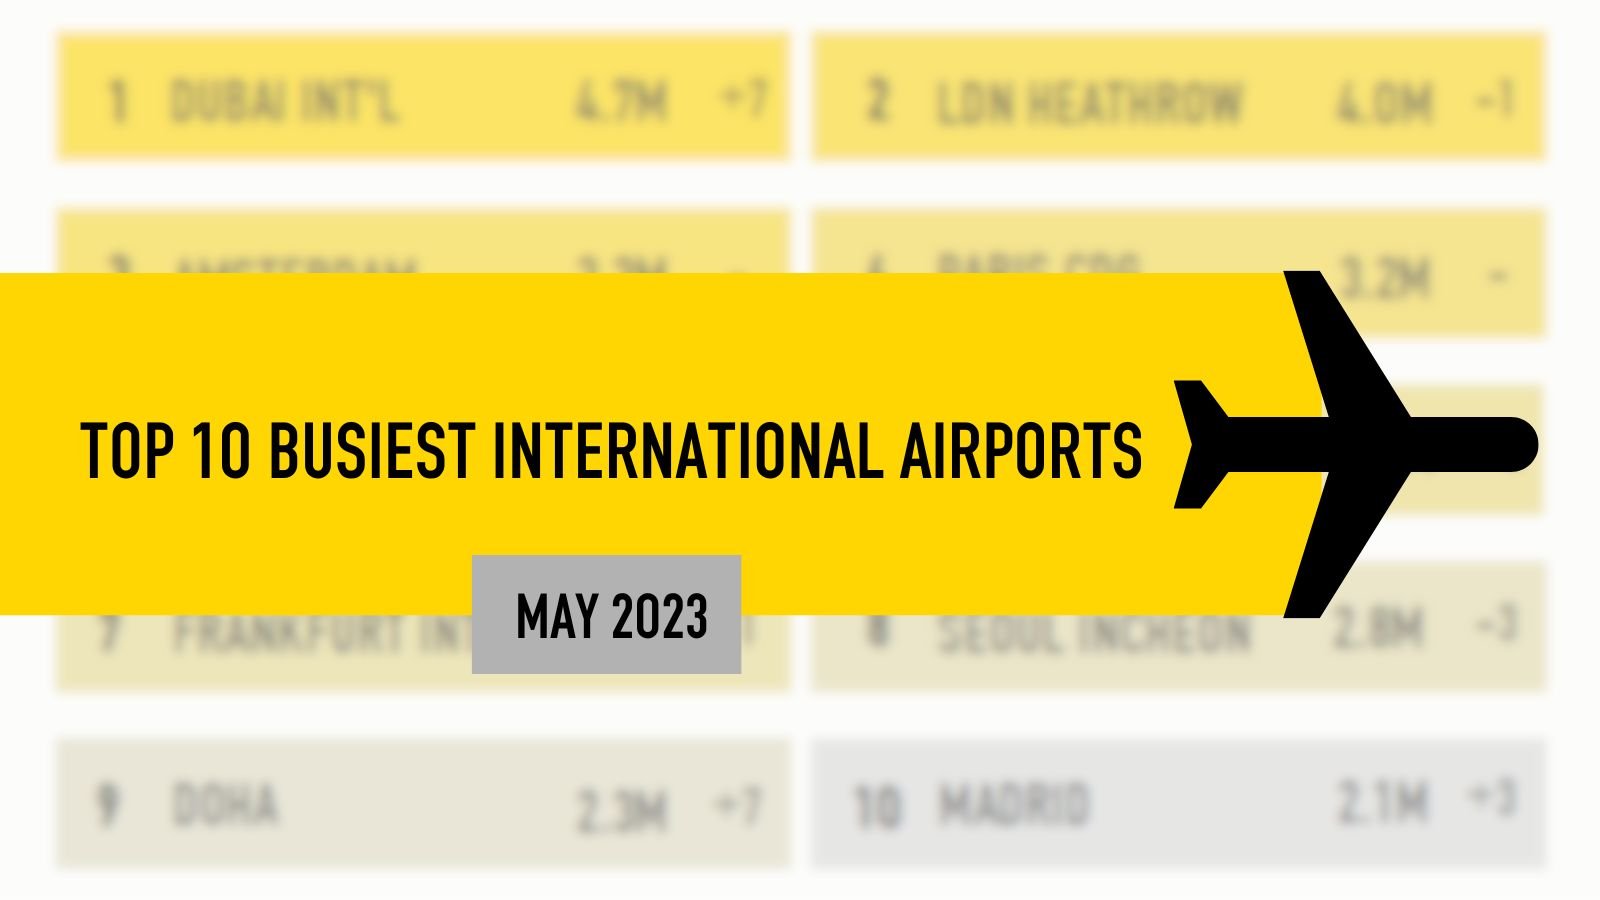 Busiest International Airports May 2023